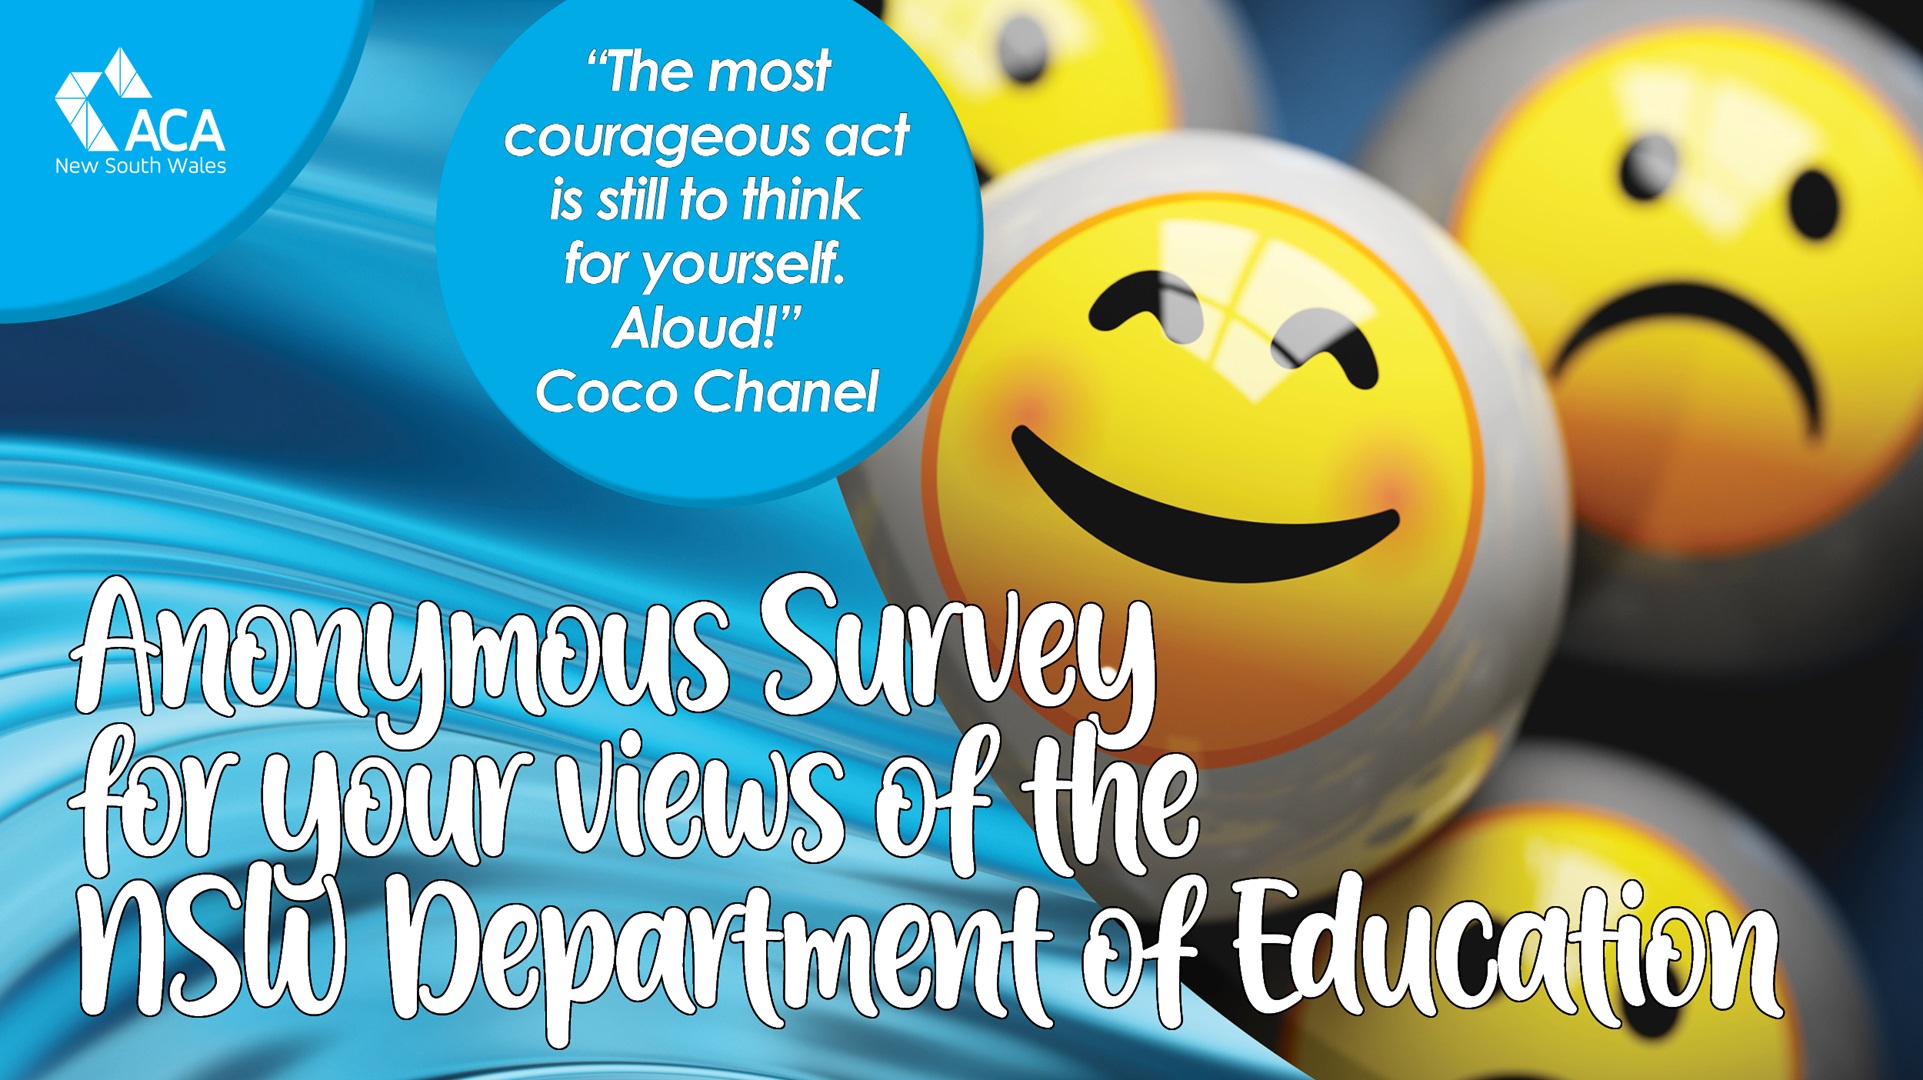 What do you think of the NSW Department of Education?